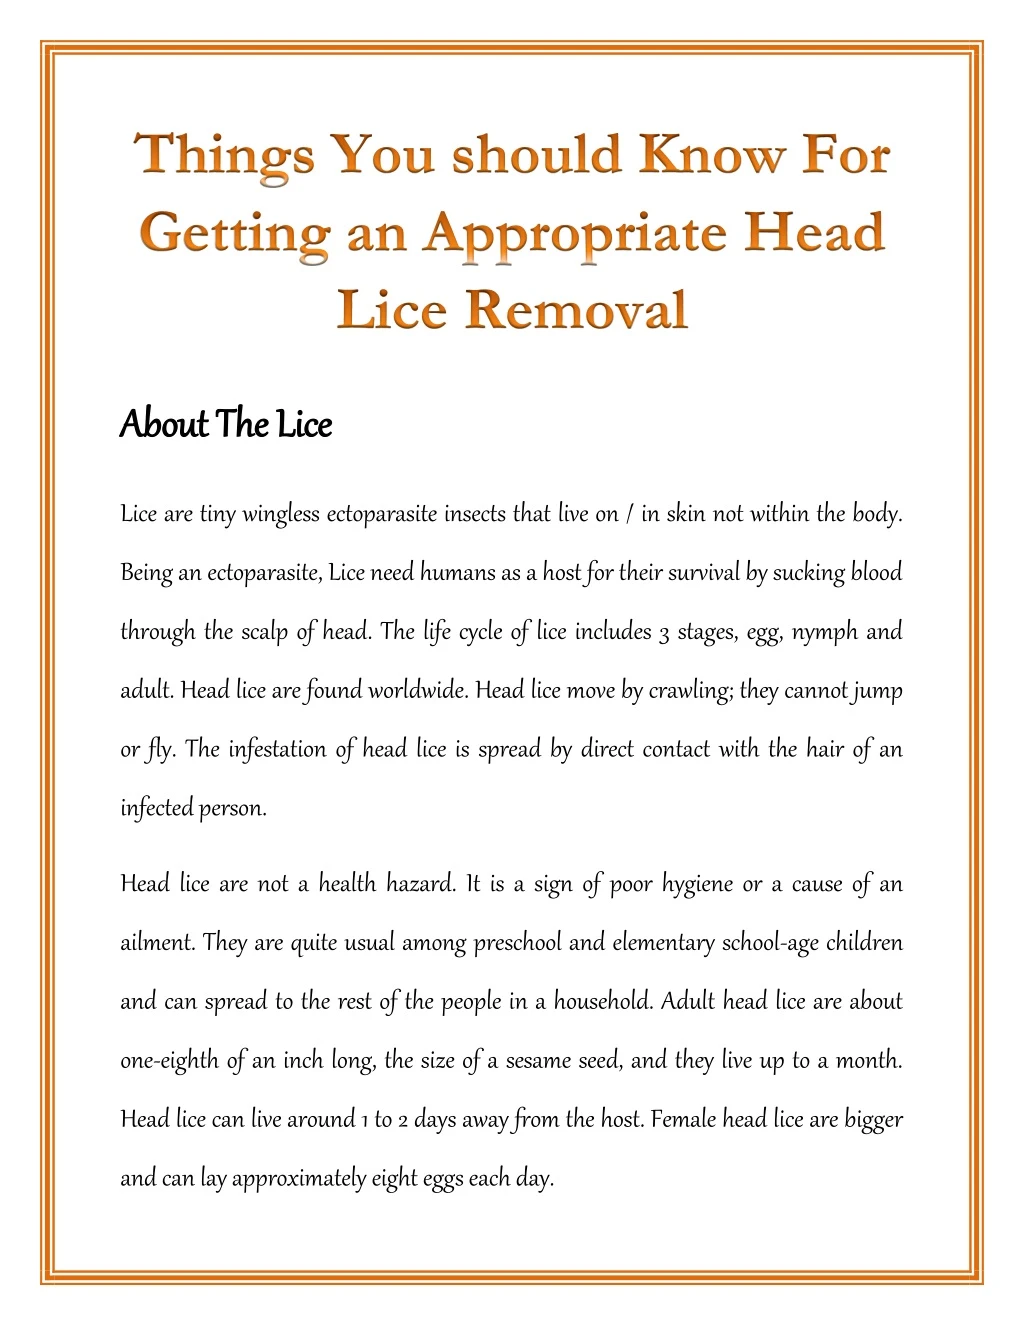 about the lice about the lice